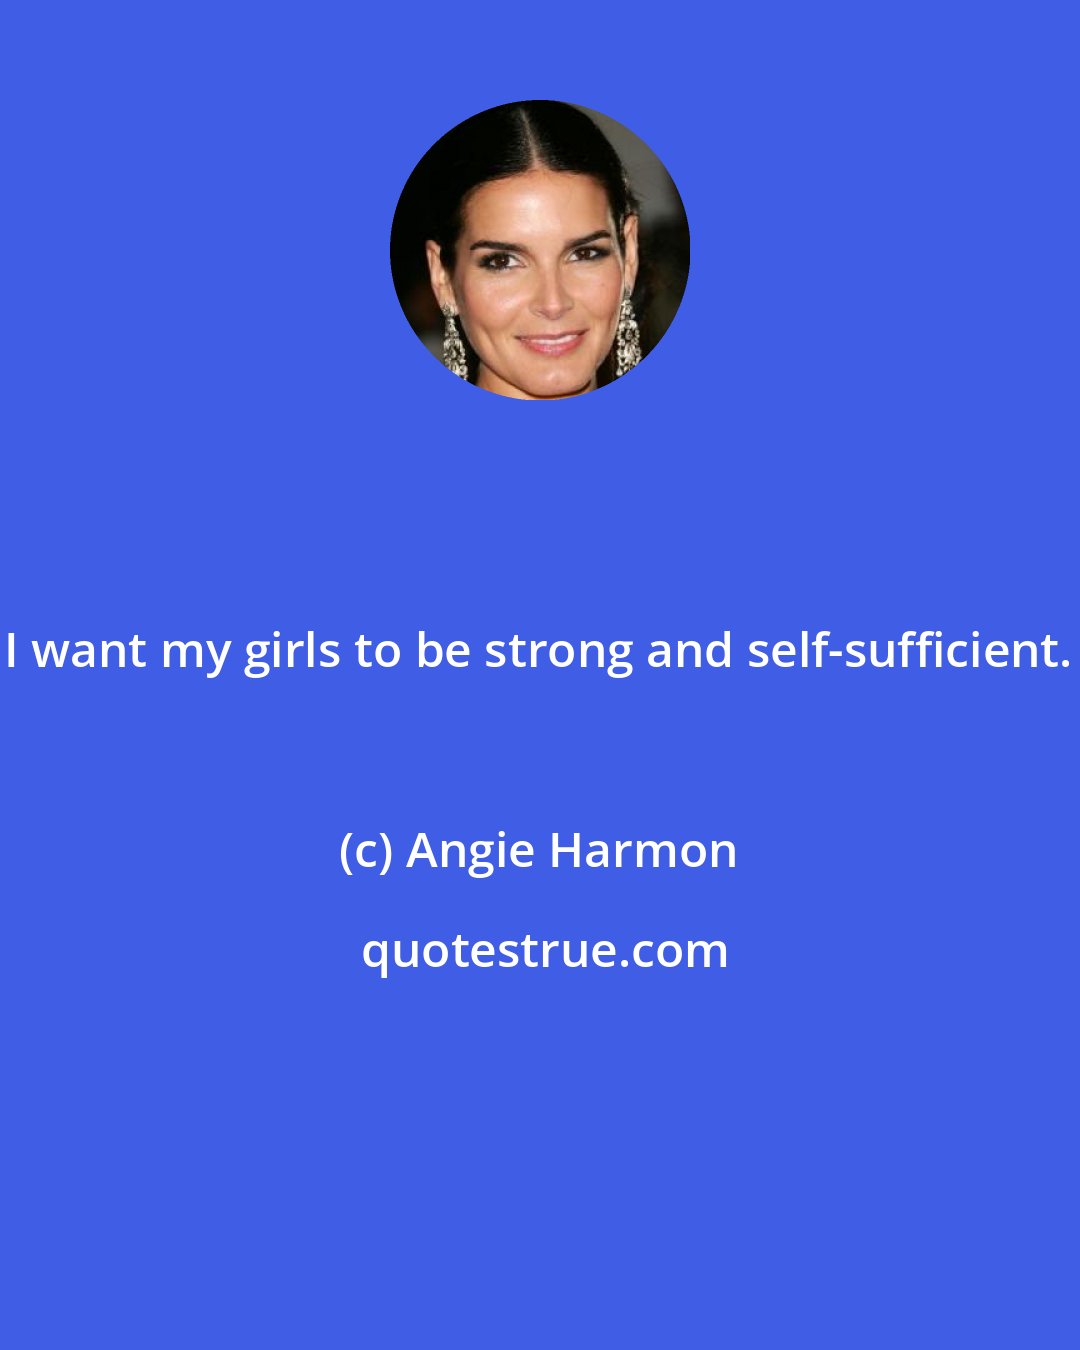 Angie Harmon: I want my girls to be strong and self-sufficient.